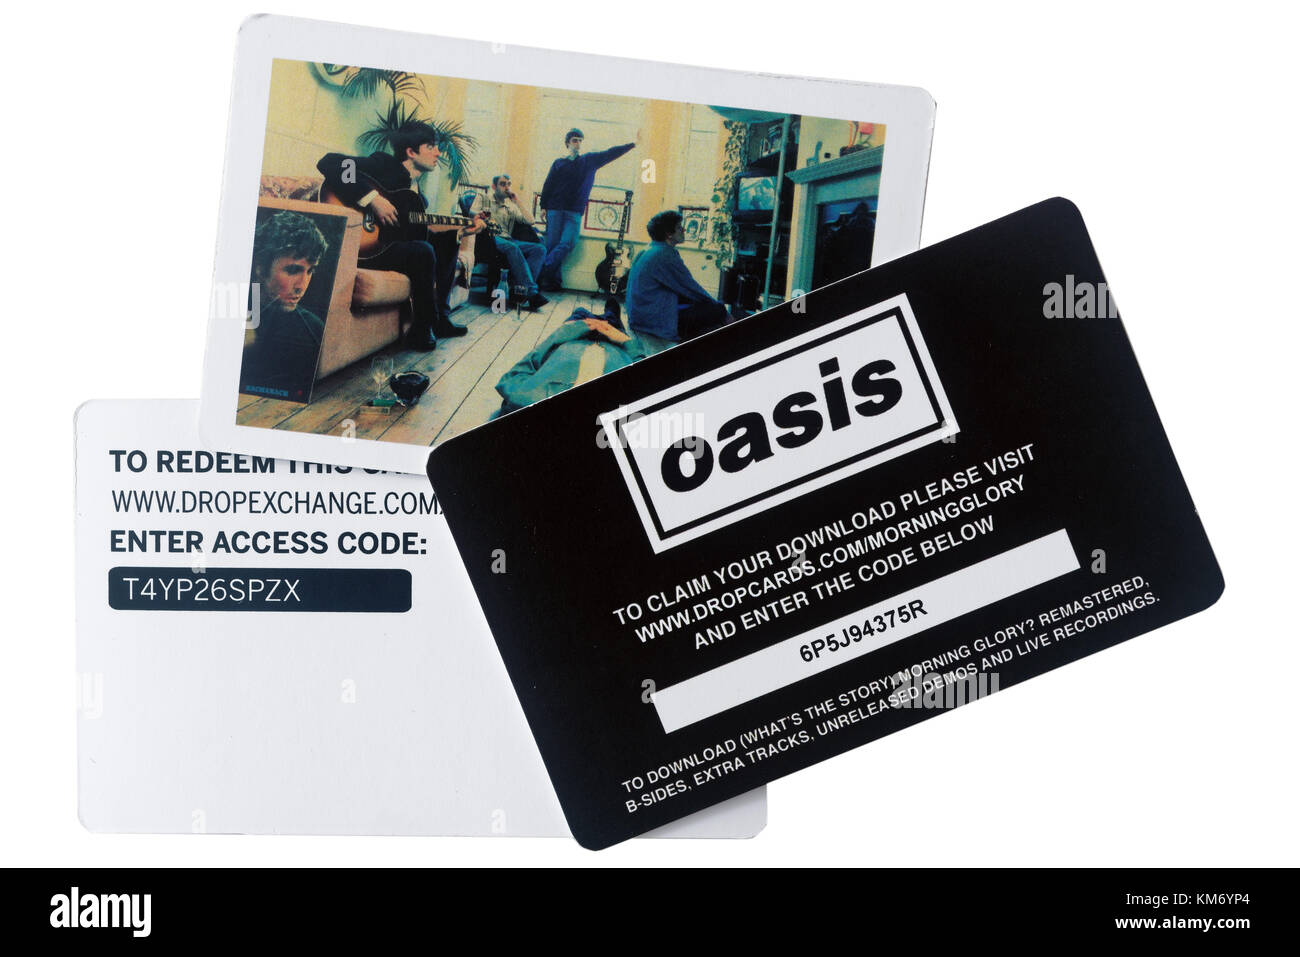 https://c8.alamy.com/comp/KM6YP4/oasis-digital-album-download-cards-included-when-you-buy-a-vinyl-record-KM6YP4.jpg